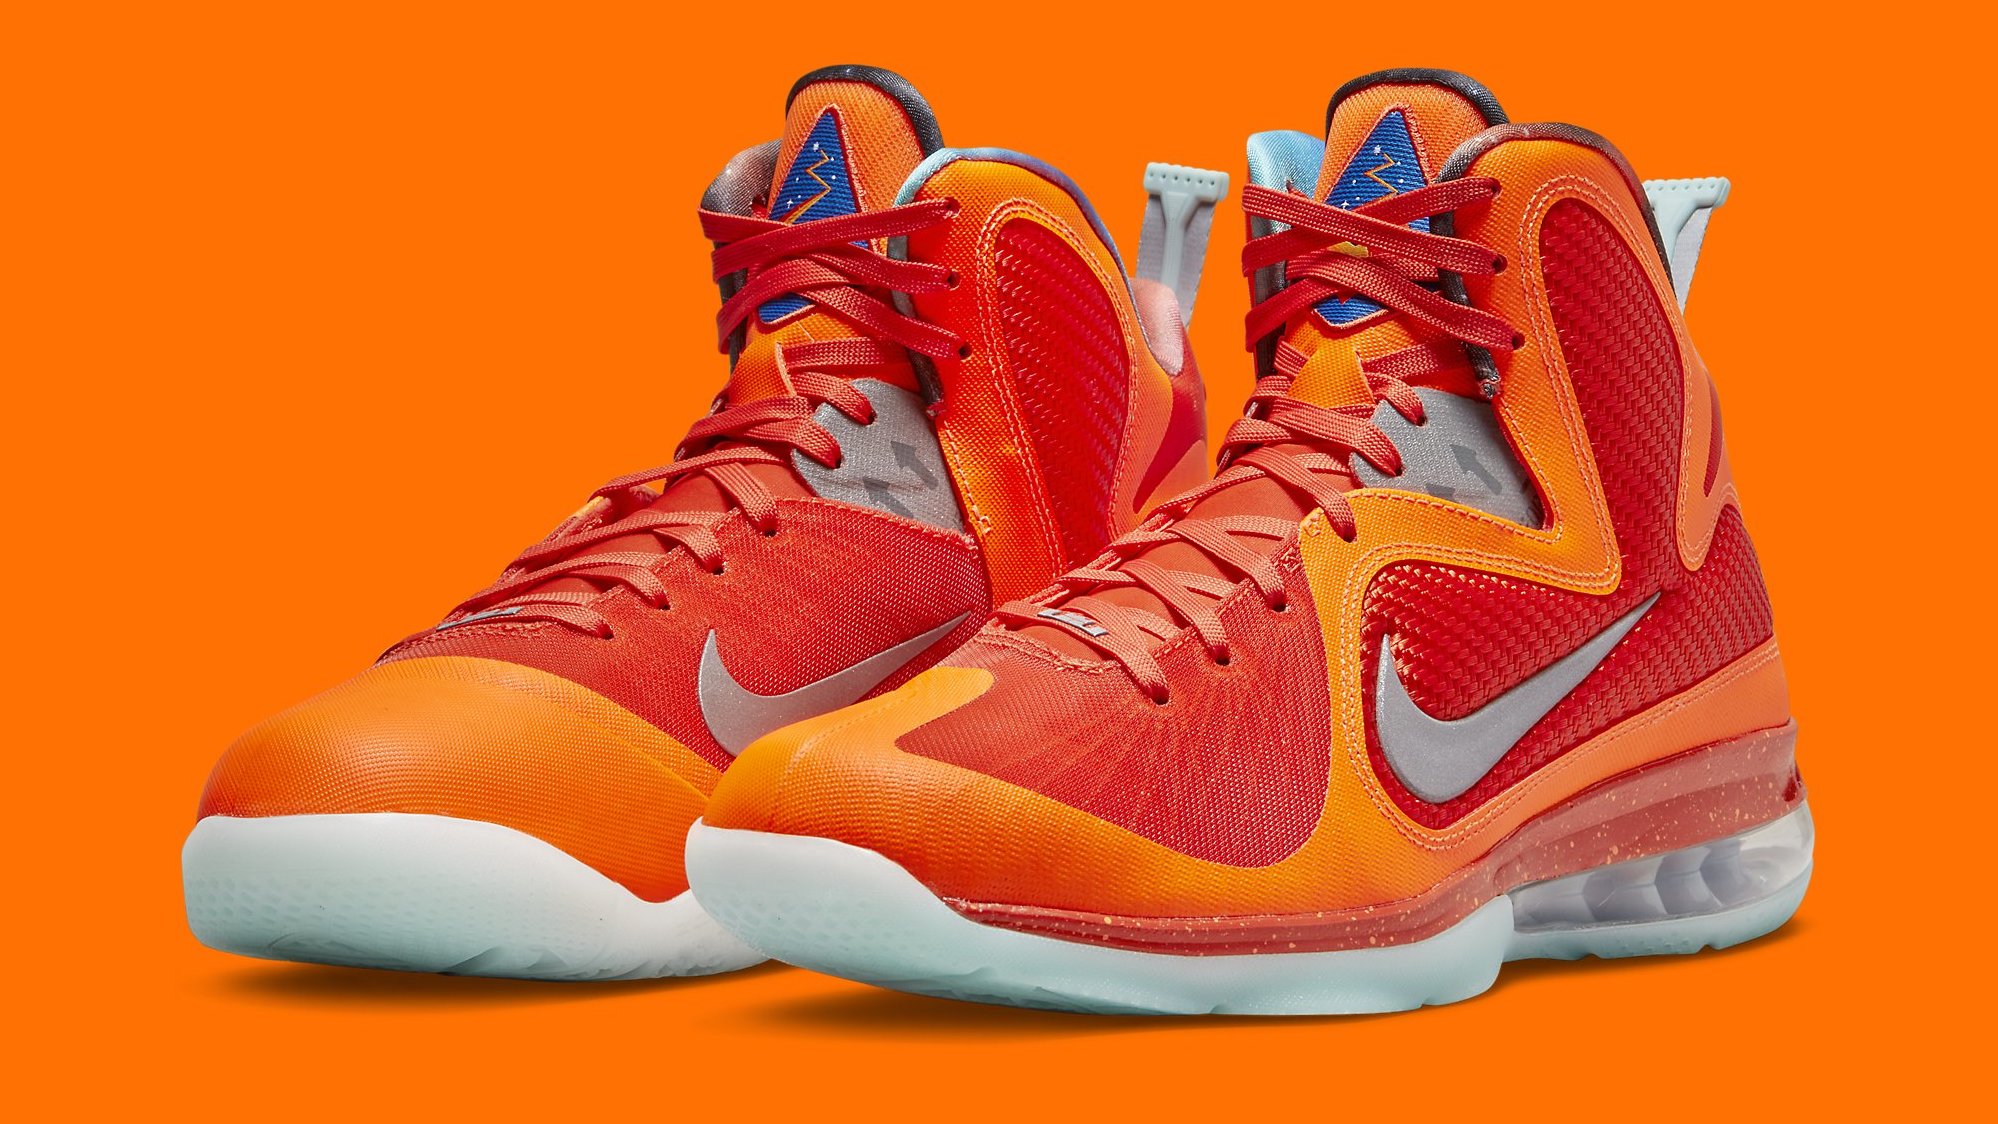 Nike Basketball Releases NBA All-Star Colorways - Sports